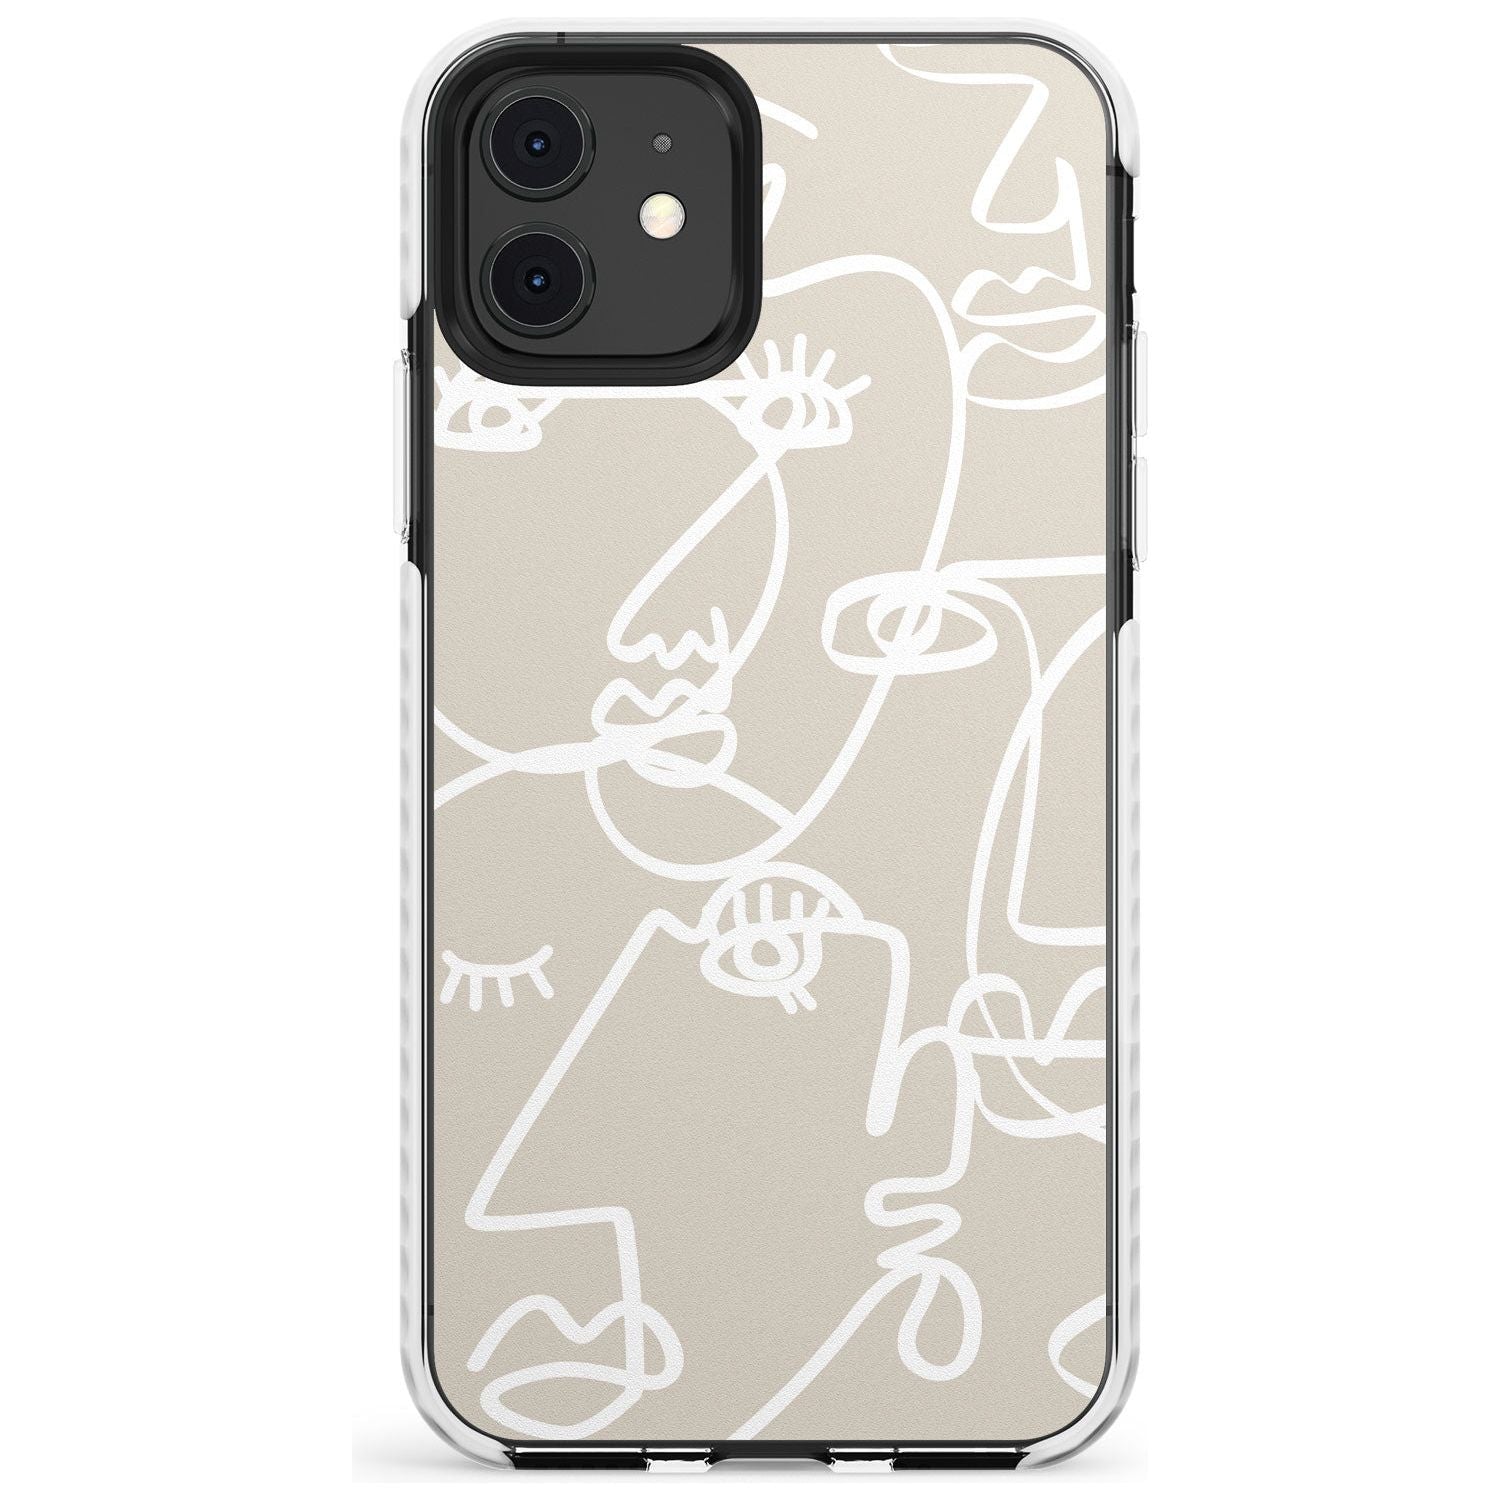 Continuous Line Faces: White on Beige Slim TPU Phone Case for iPhone 11